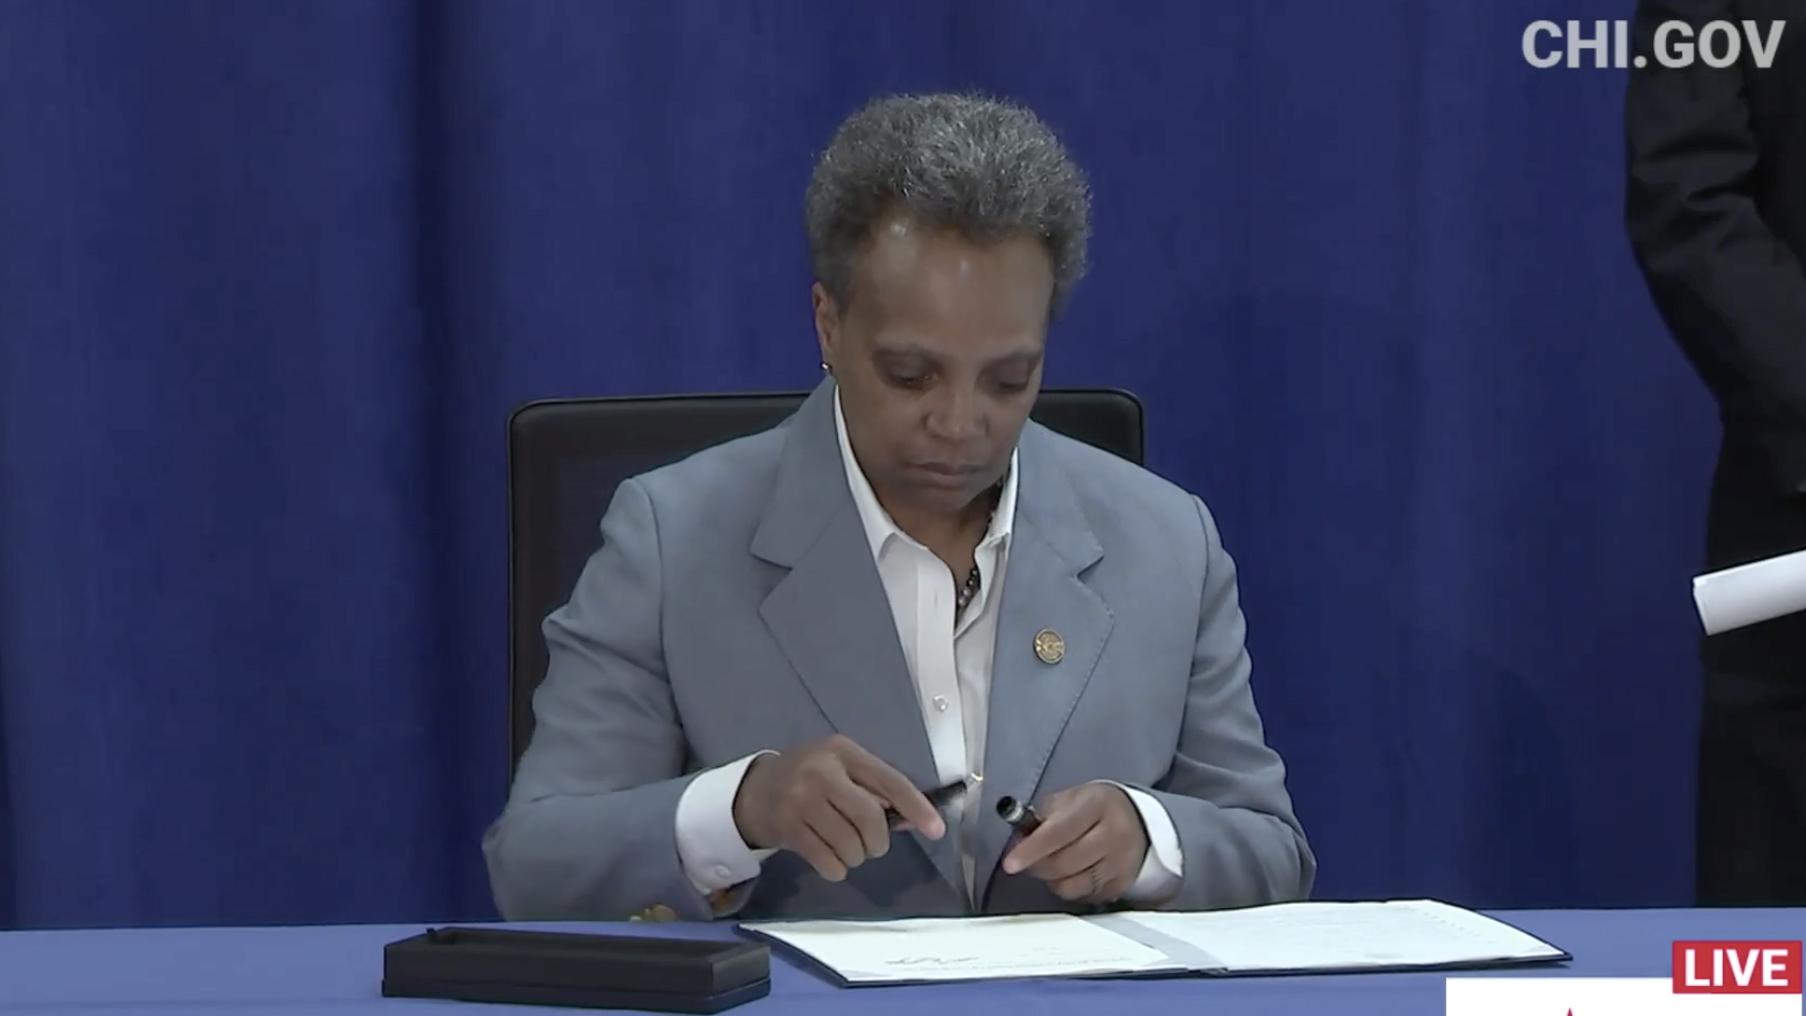 Mayor Lori Lightfoot signs an executive order ensuring all Chicago residents have equal access to COVID-19 aid programs regardless of citizenship status on Tuesday, April 7, 2020. (Chicago Mayor’s Office / Facebook photo)